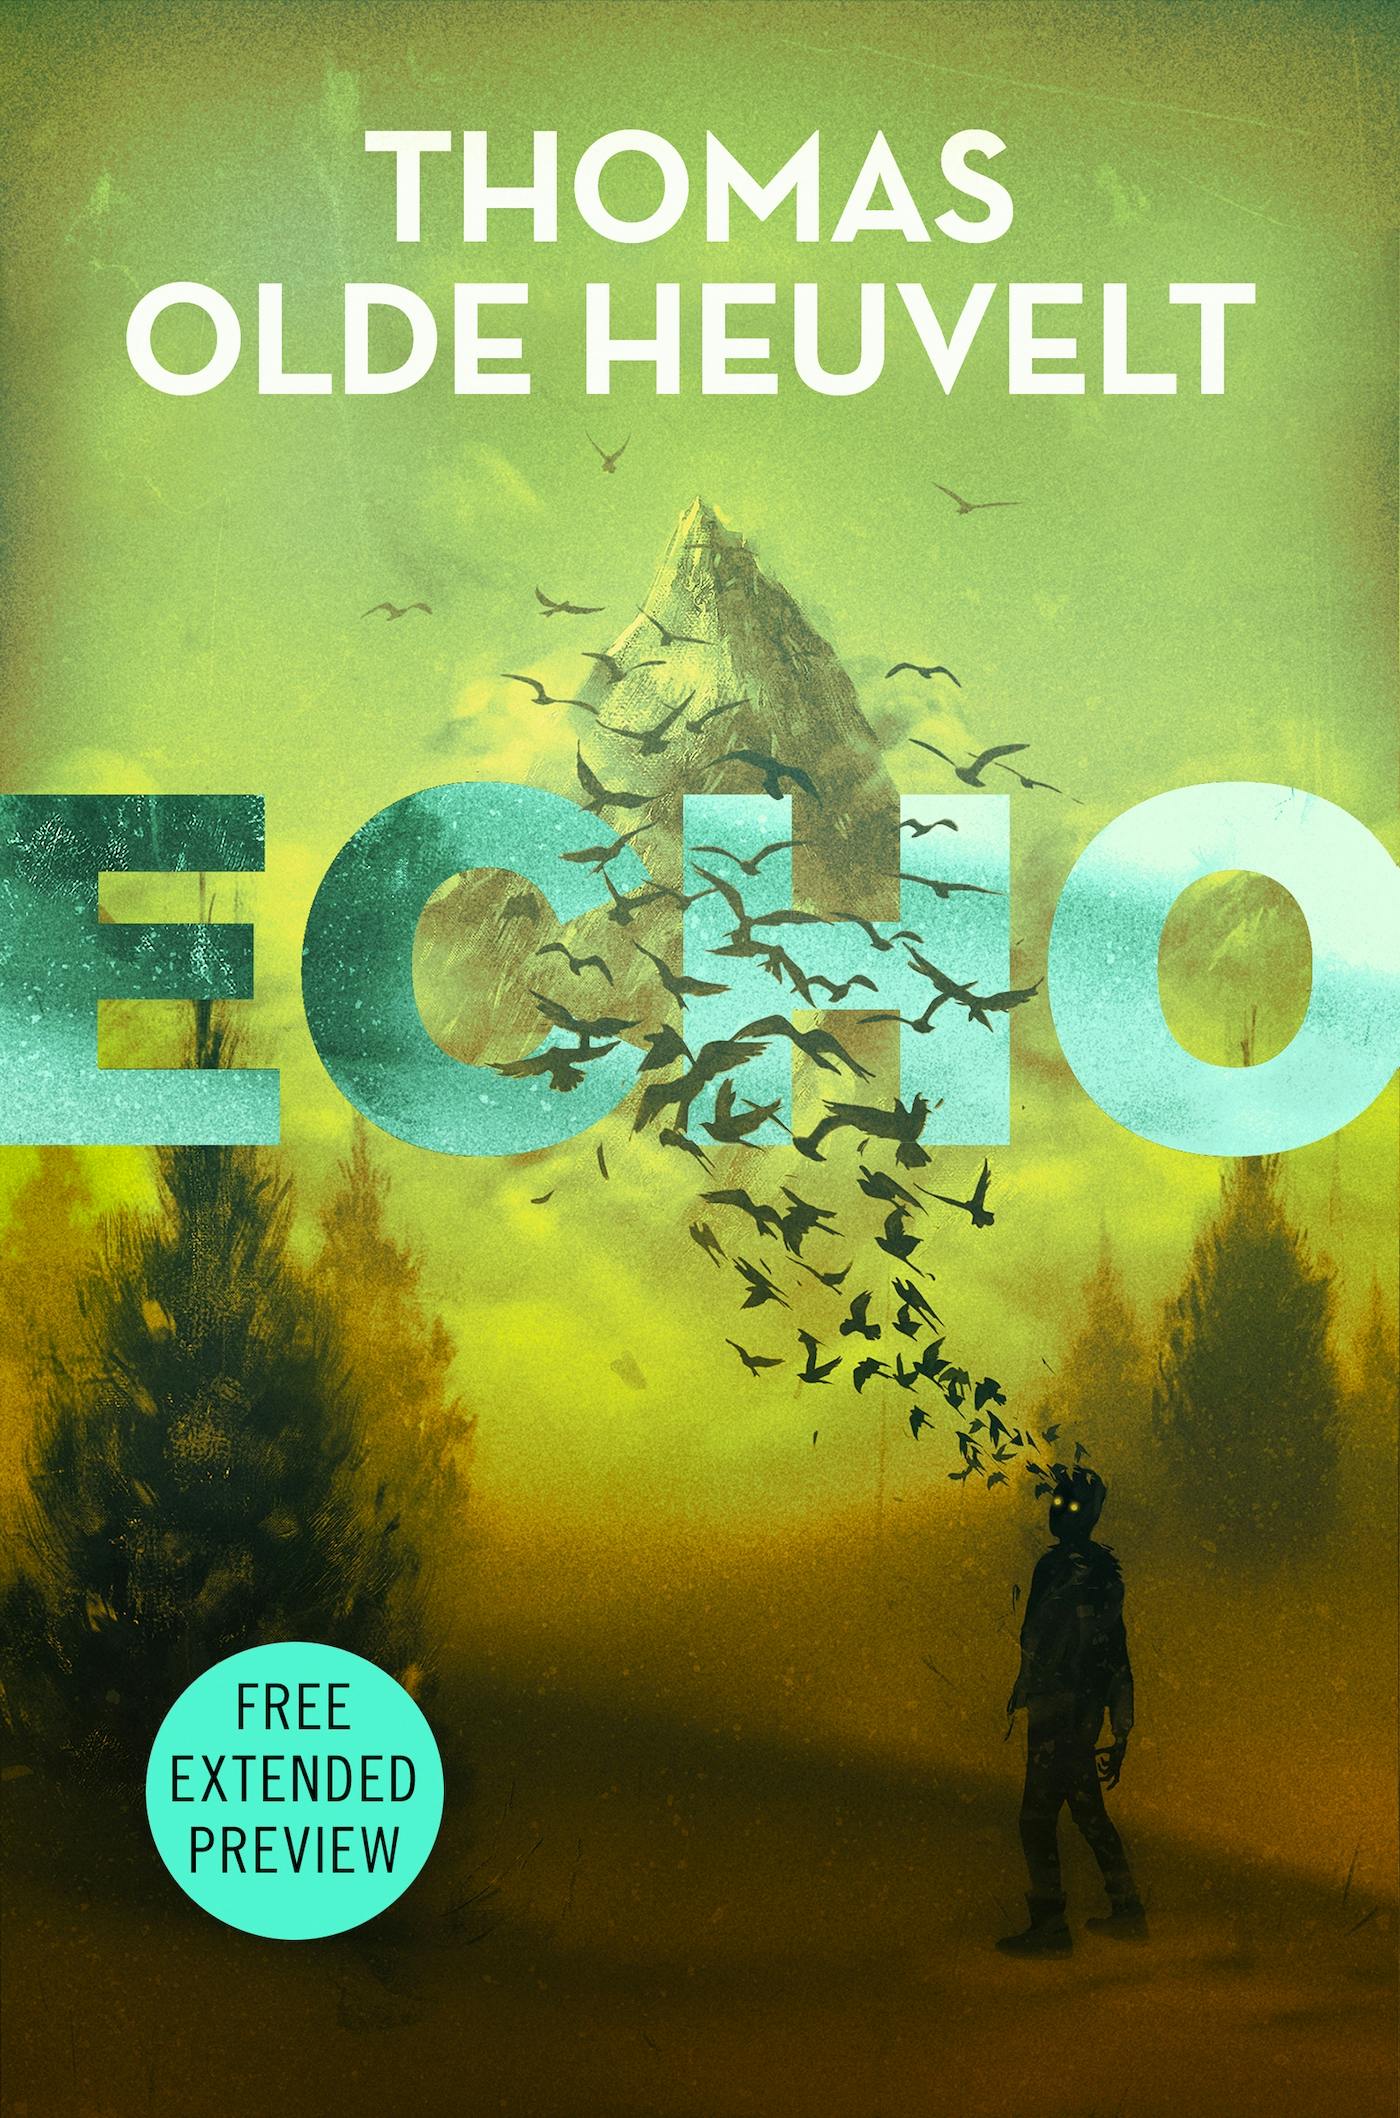 Cover for the book titled as: Echo Sneak Peek